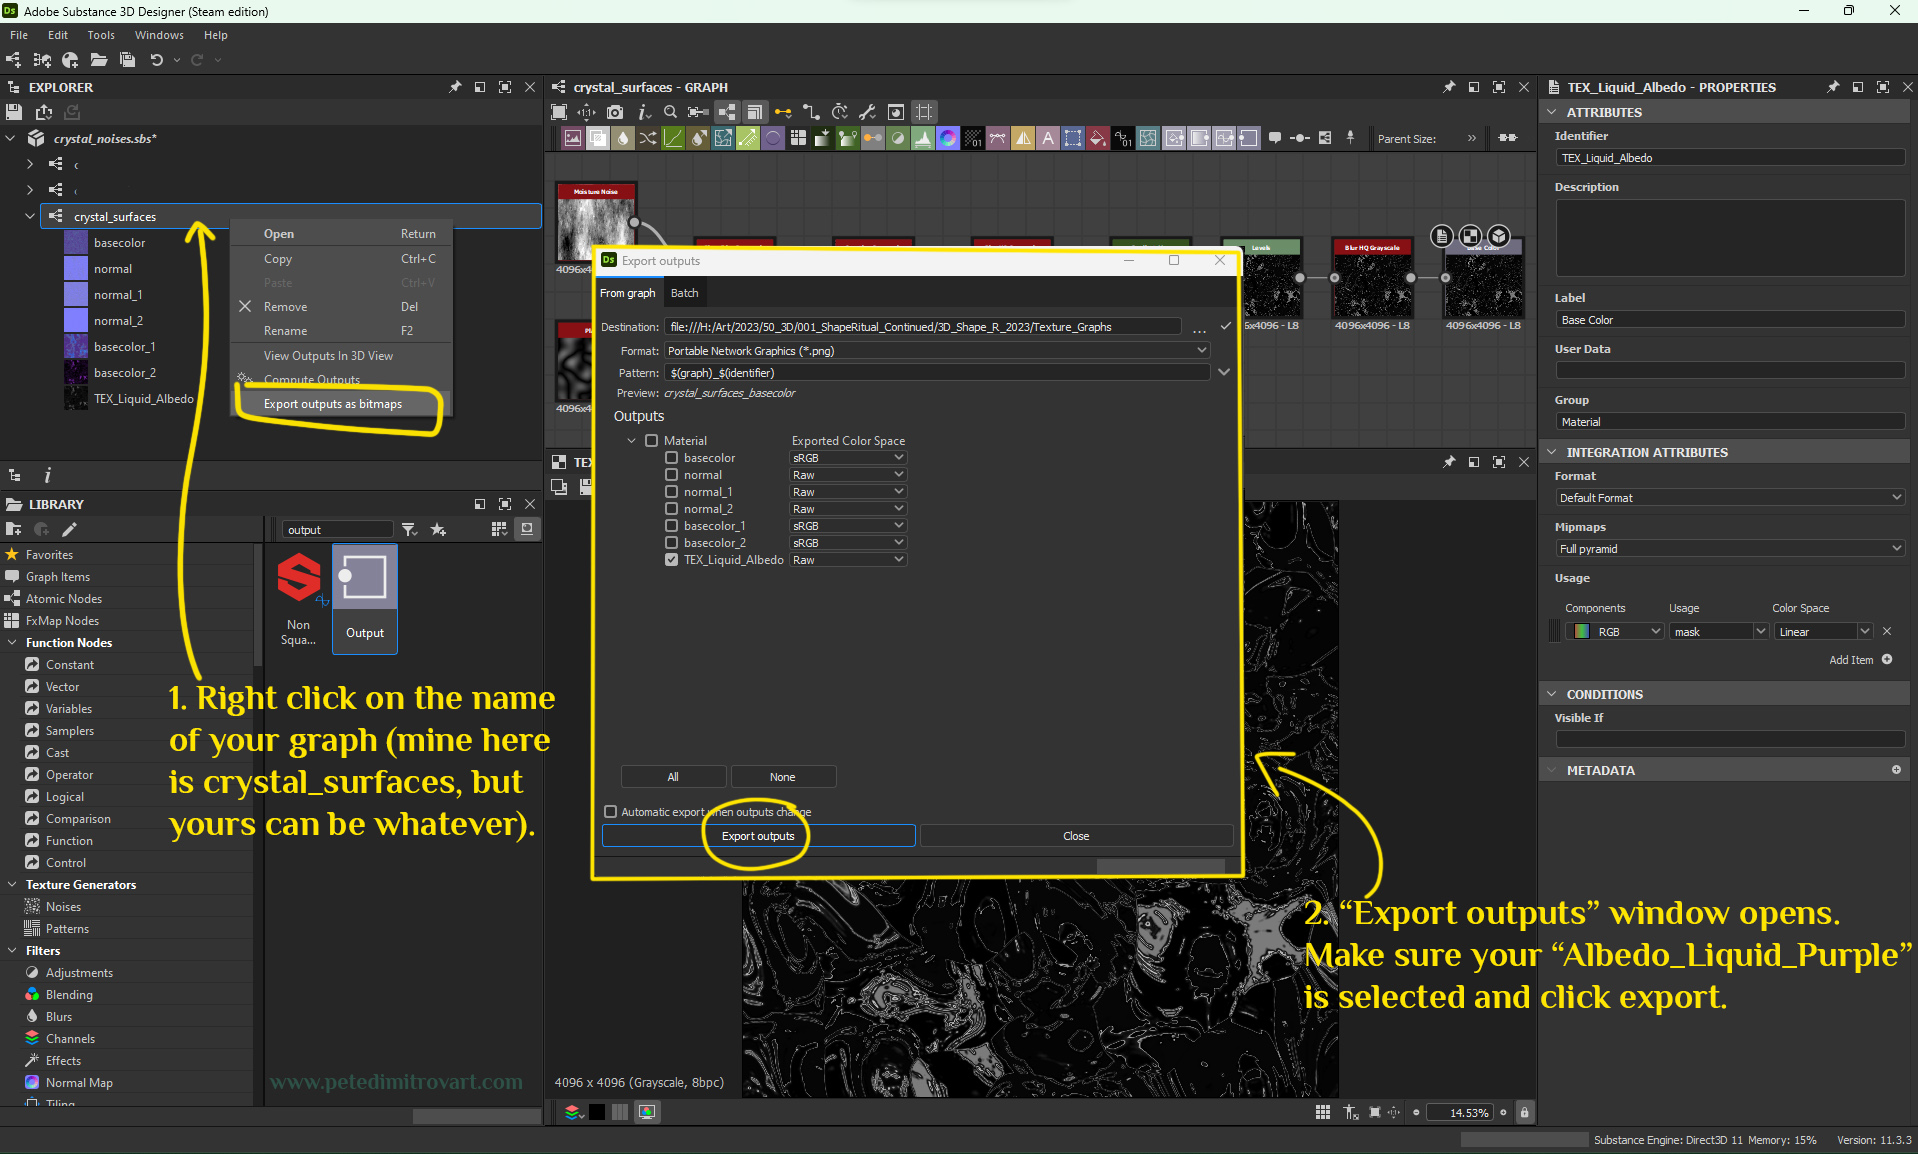 Image showing the Export sequence of actions: clicking on the graph name, exporting. Yellow text is transcribed below.